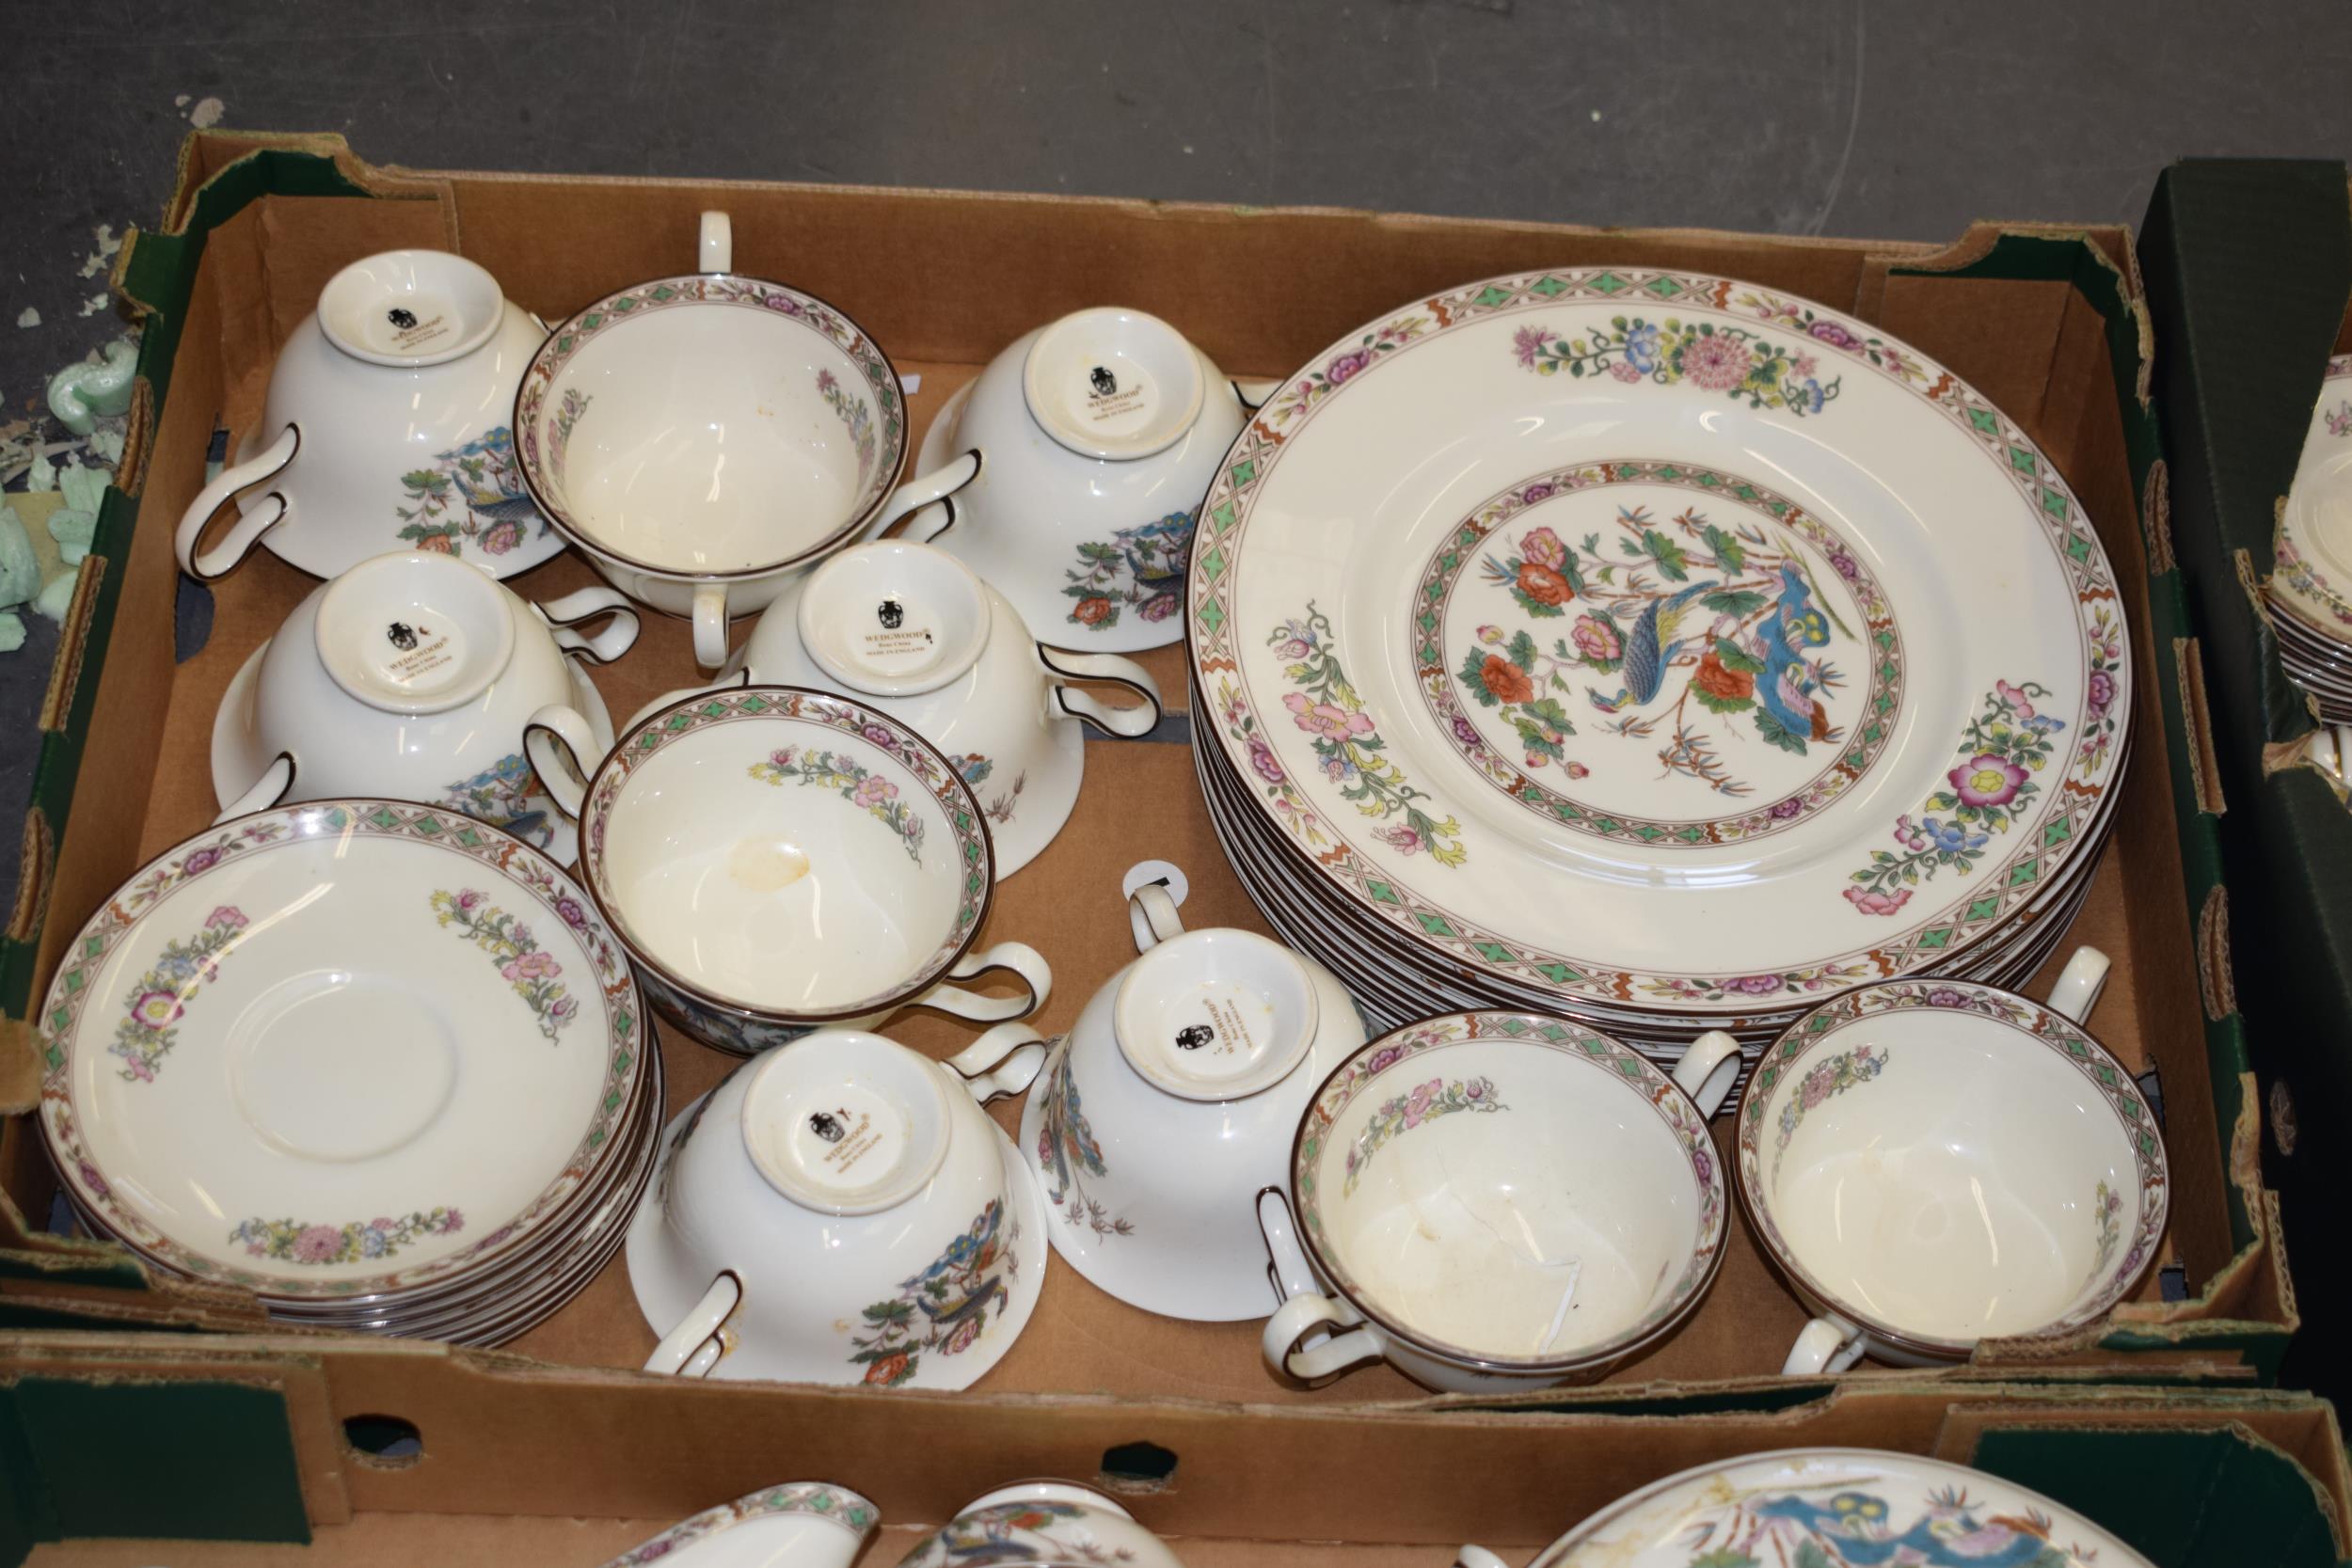 A large and extensive collection of Wedgwood Kutani Crane tea and dinner ware to include cups, - Image 5 of 7